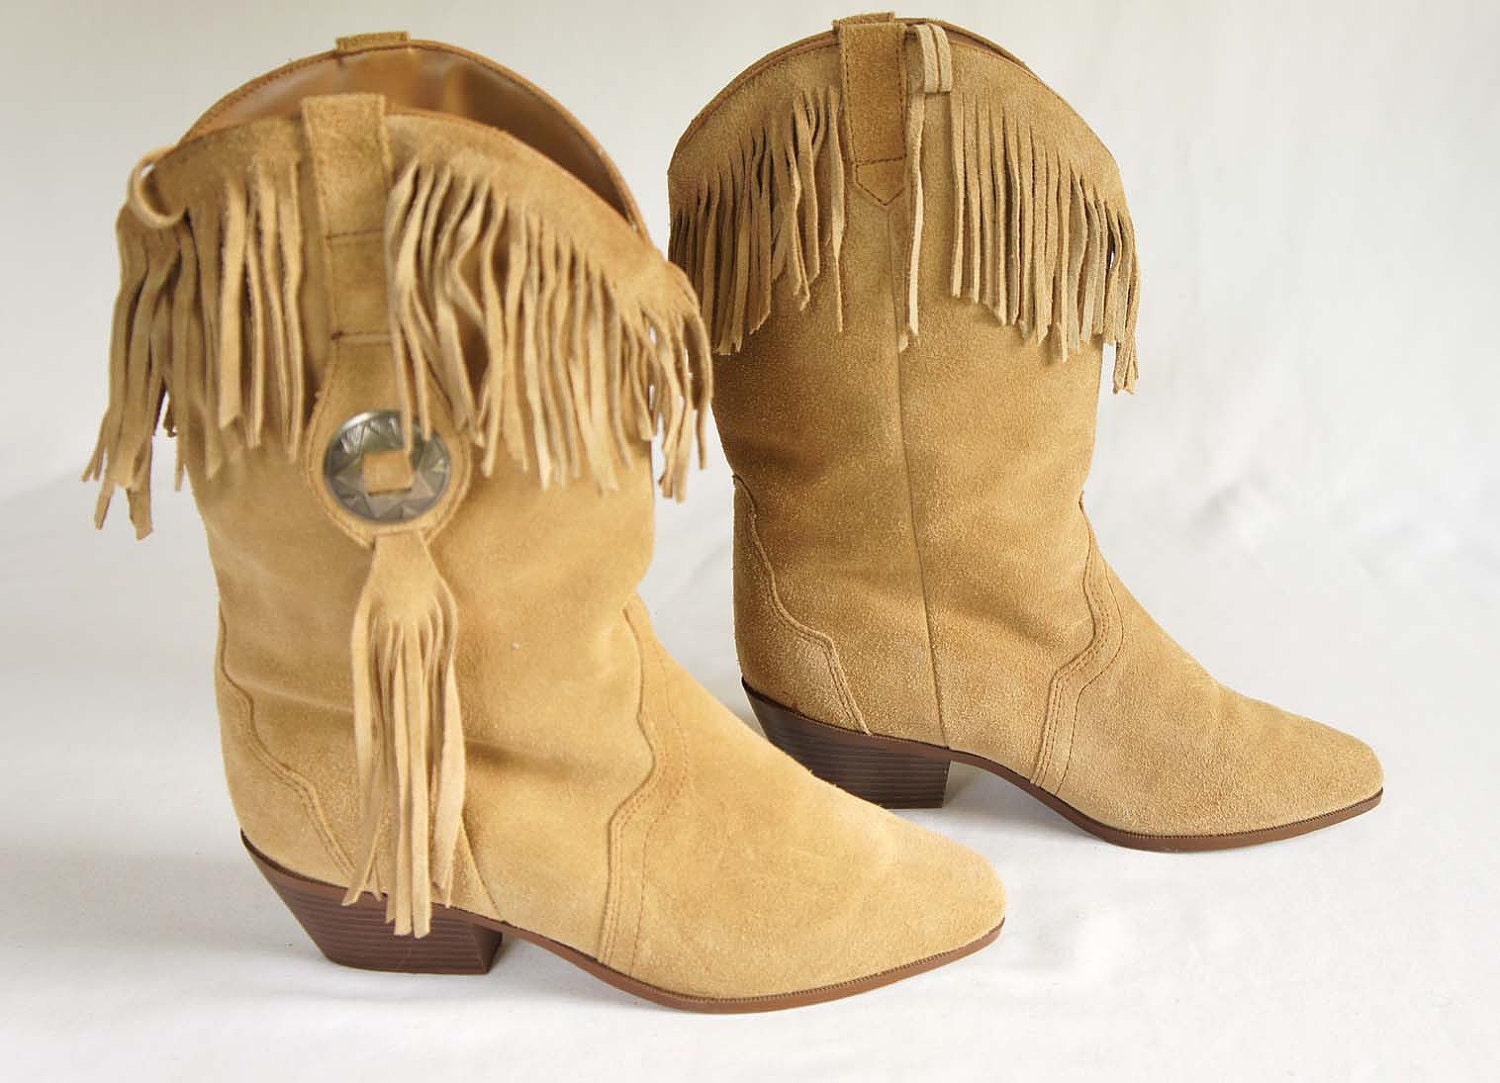 Vintage Cowboy Boots in Tan Suede with fringe and tassels